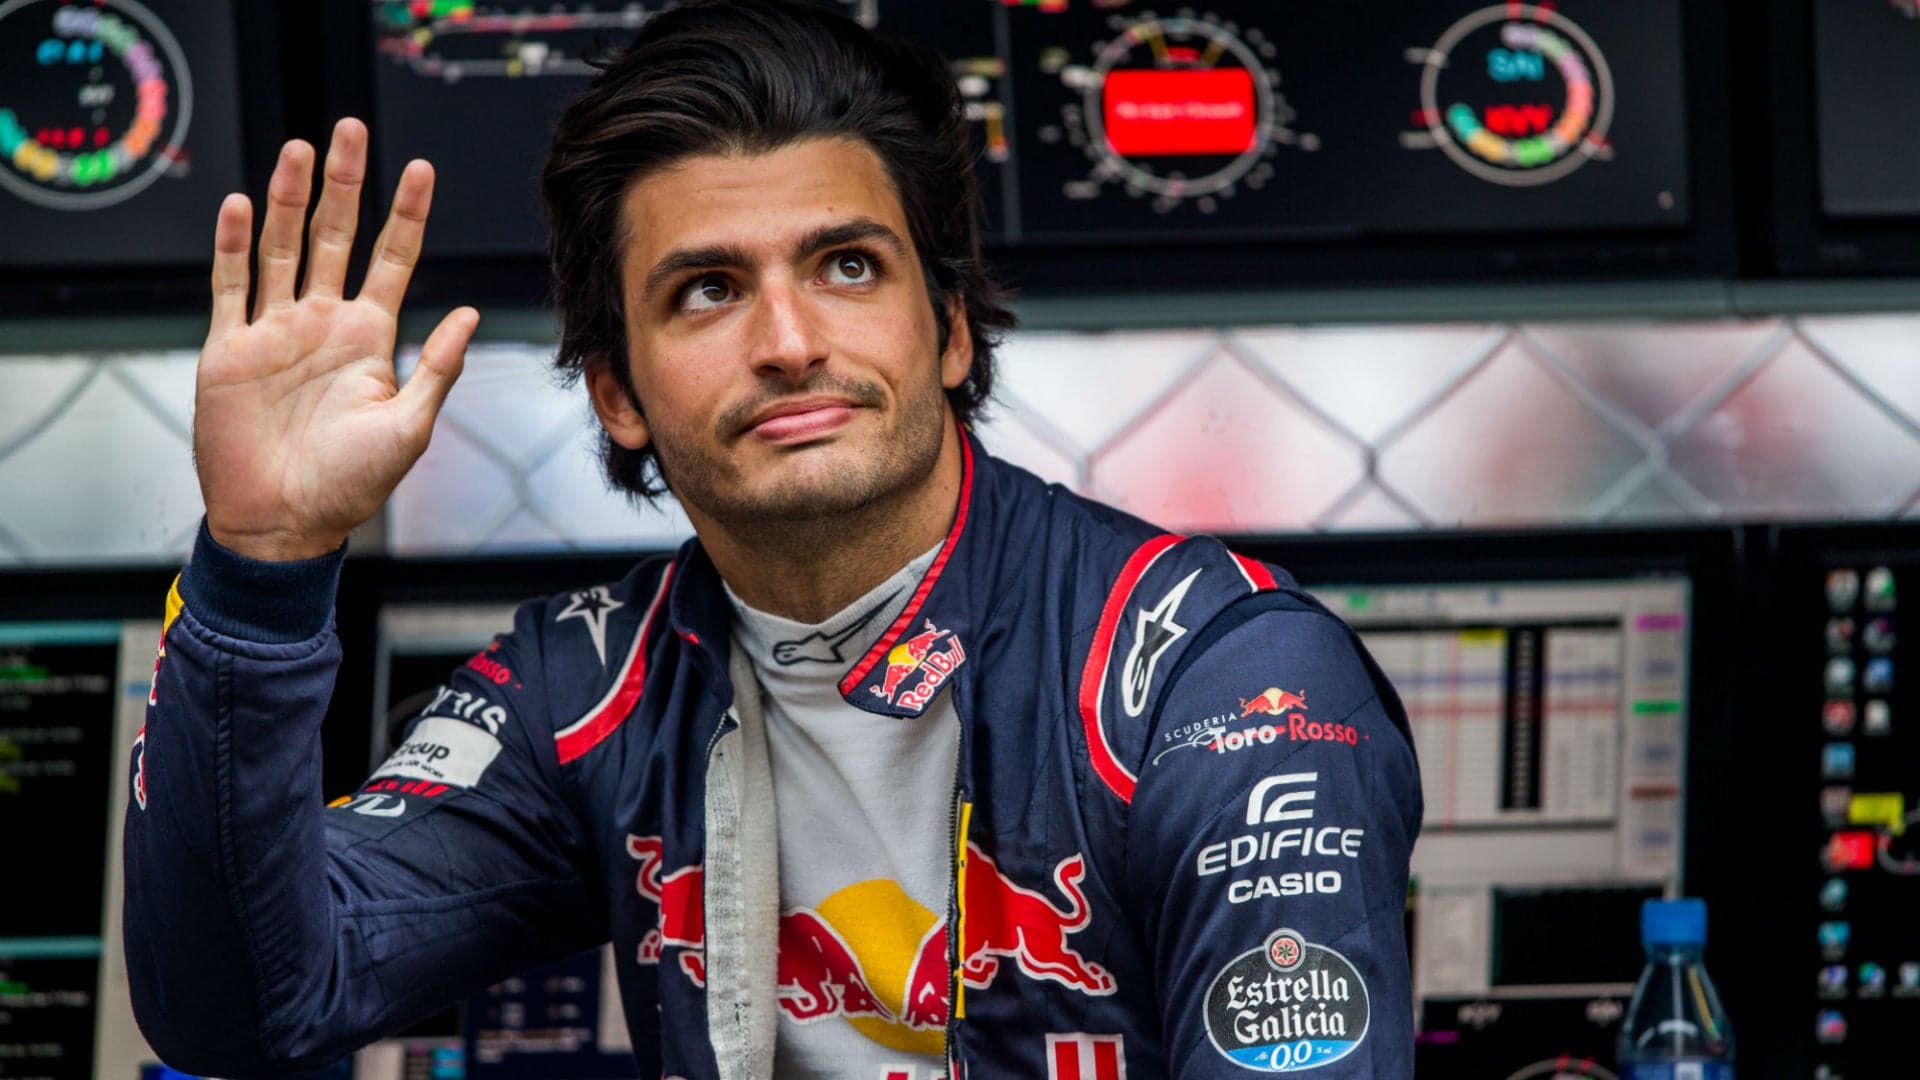 Sainz Move To Renault Frees Up Space For Engine Deal With McLaren, Report Says